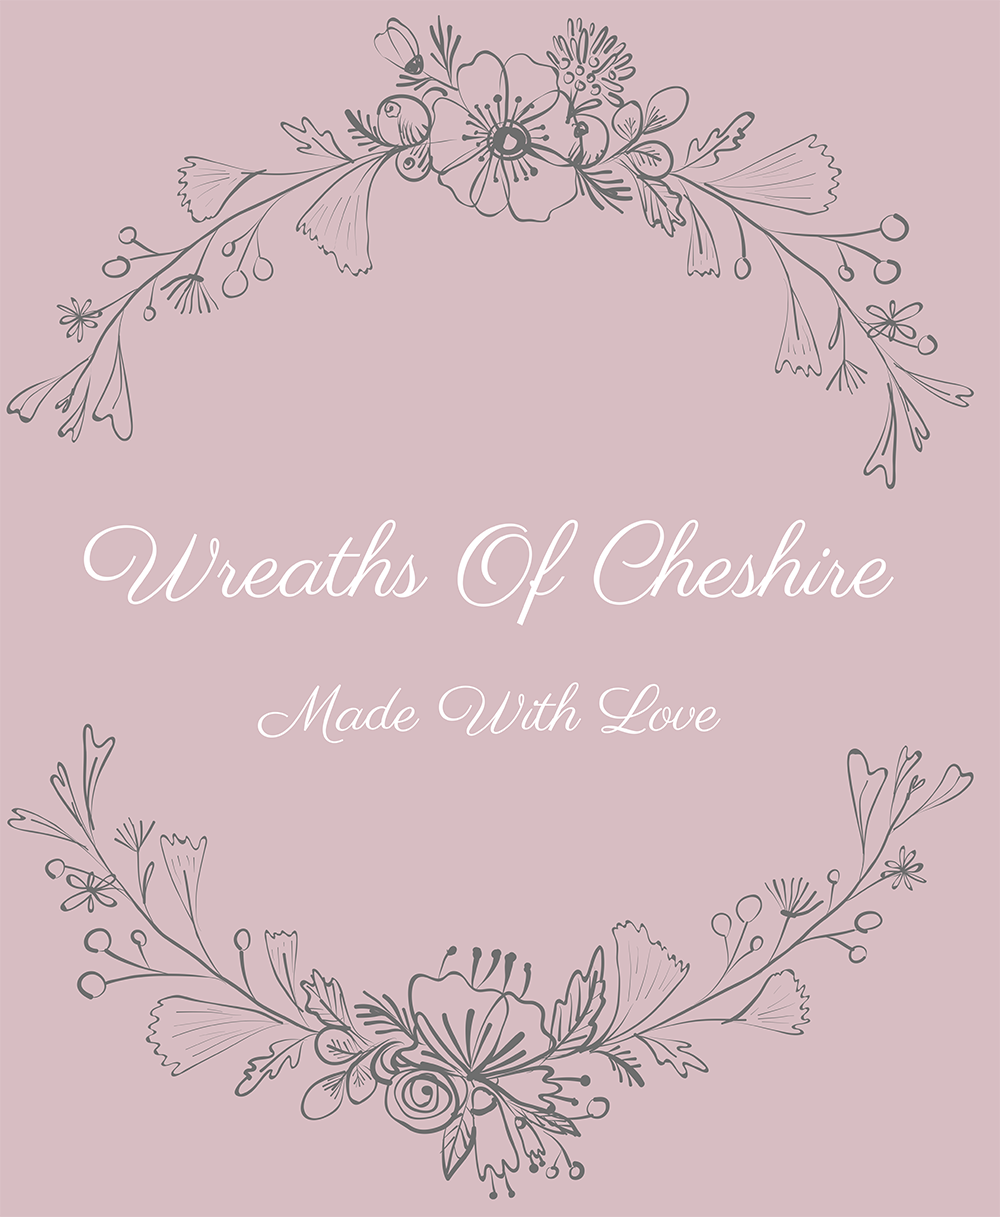 Wreaths of Cheshire